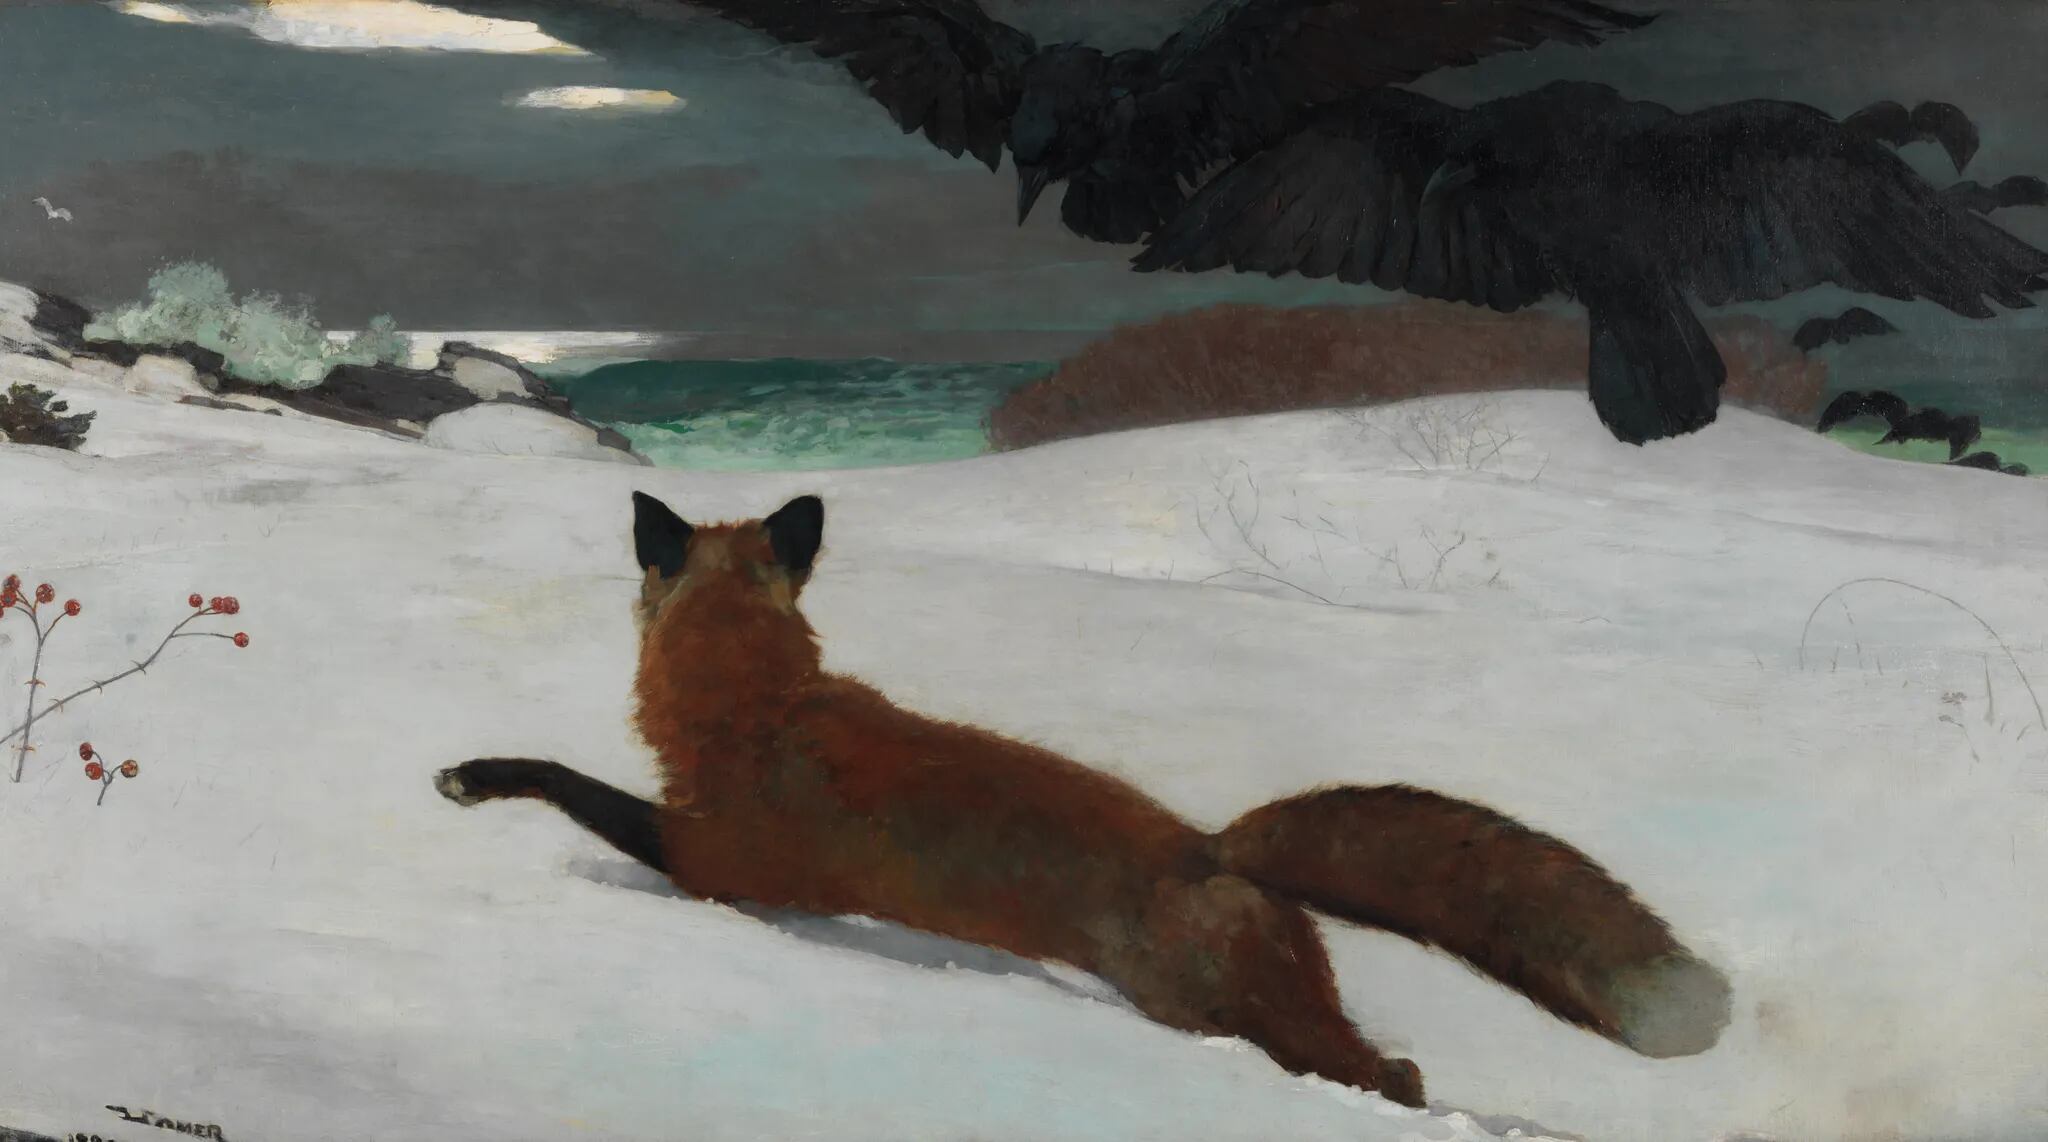 Winslow Homer's "The Fox Hunt," which many argue is one of the best American paintings ever. The painting is a part of PAFA's new show, which runs through April 2023.